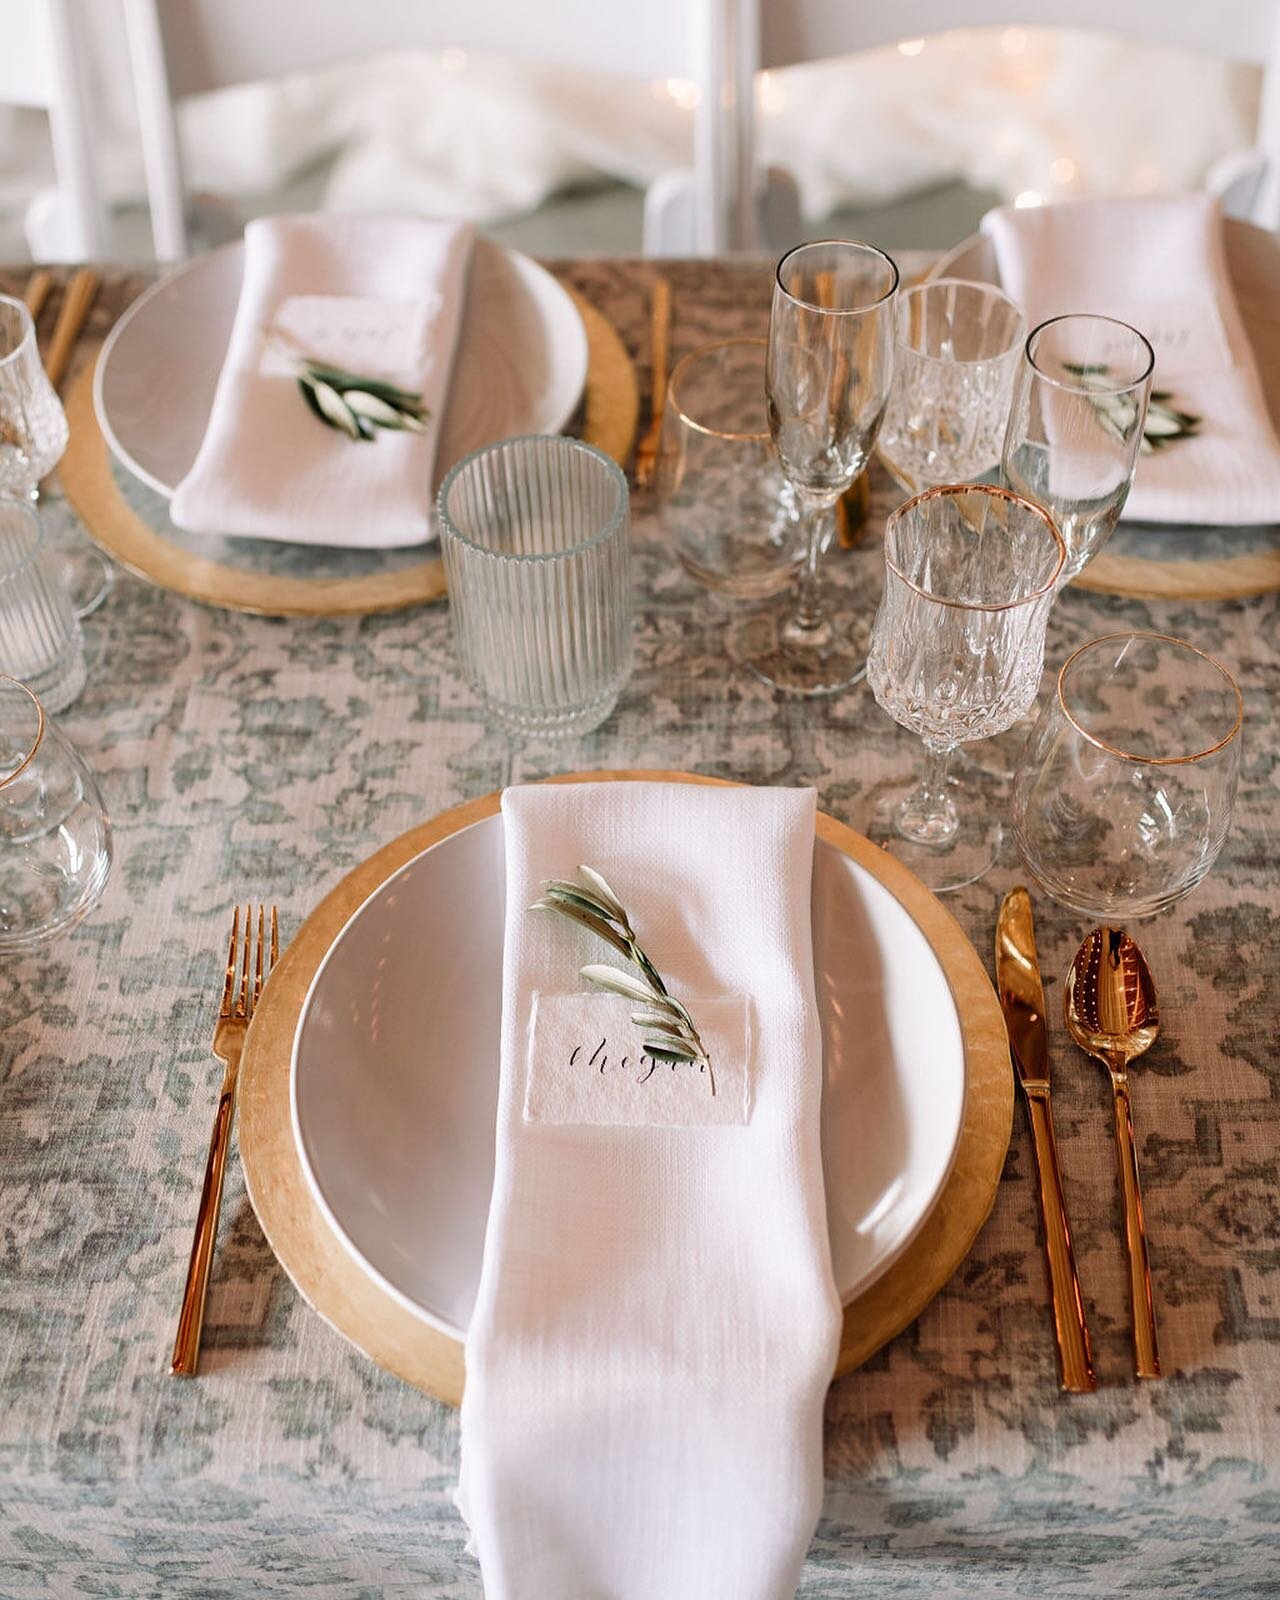 Romantic layers of ivory, sage green and gold for this head table. 
.
Photo @kristinjeanphotographer 
Design @better2gather 
Floral @macsfloral 
Venue @tworiverslodge 
Linens @bbjlatavola